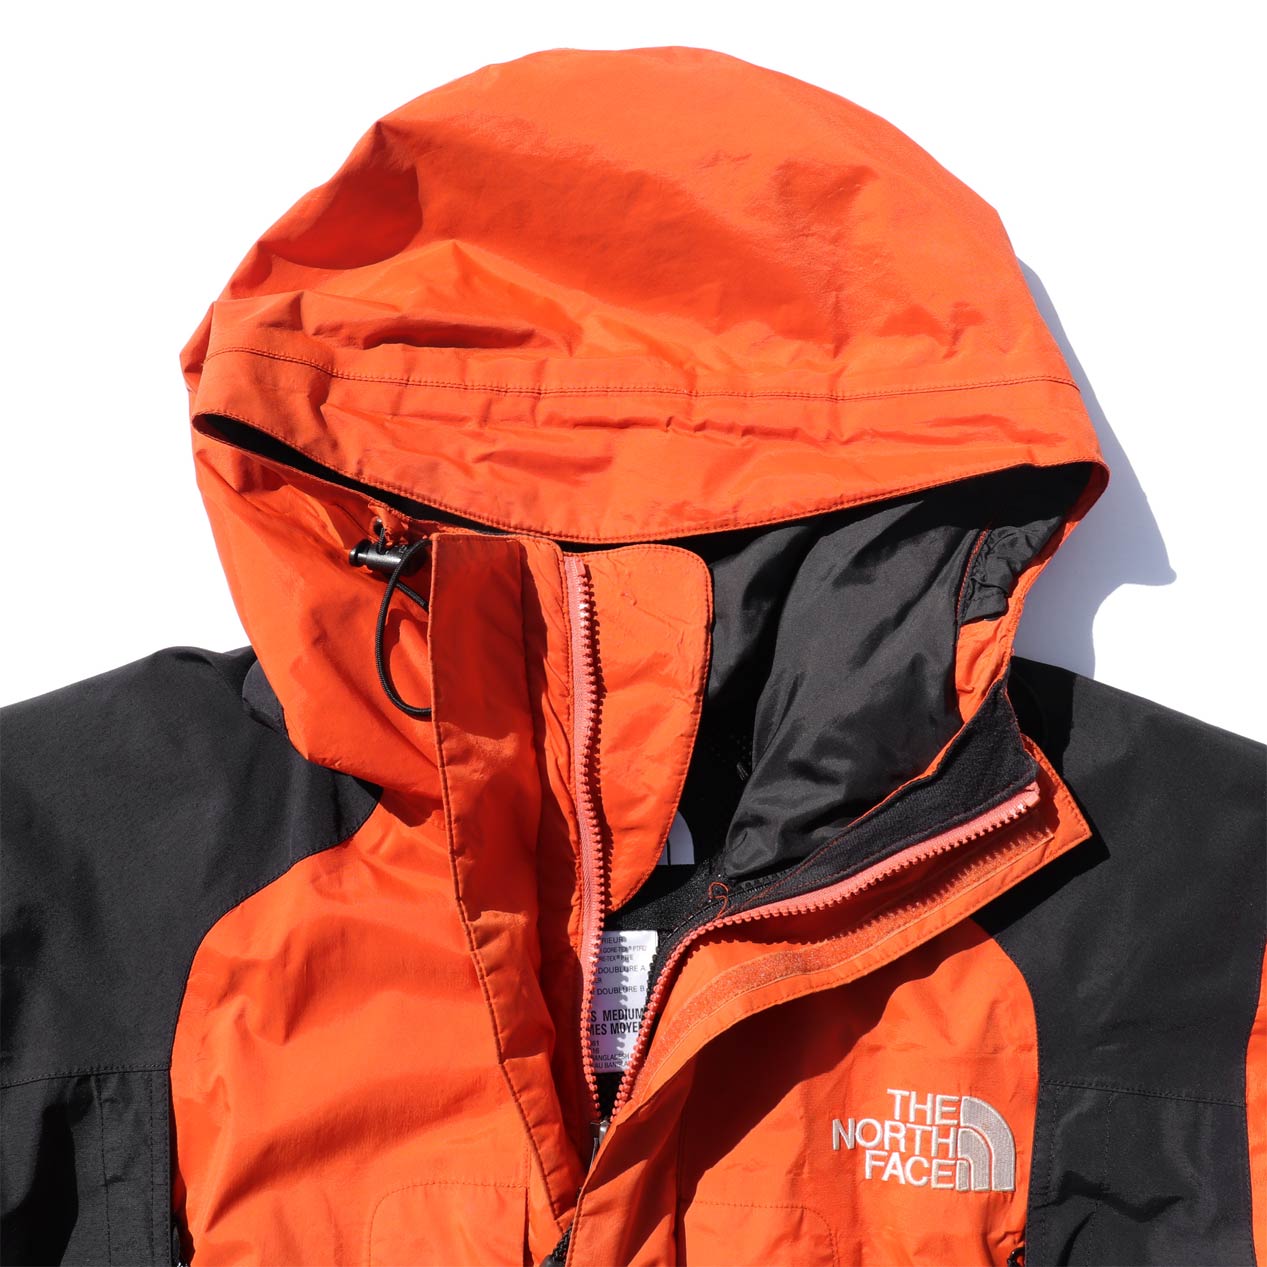 POST JUNK / 90's THE NORTH FACE GORE-TEX マウンテンライト 